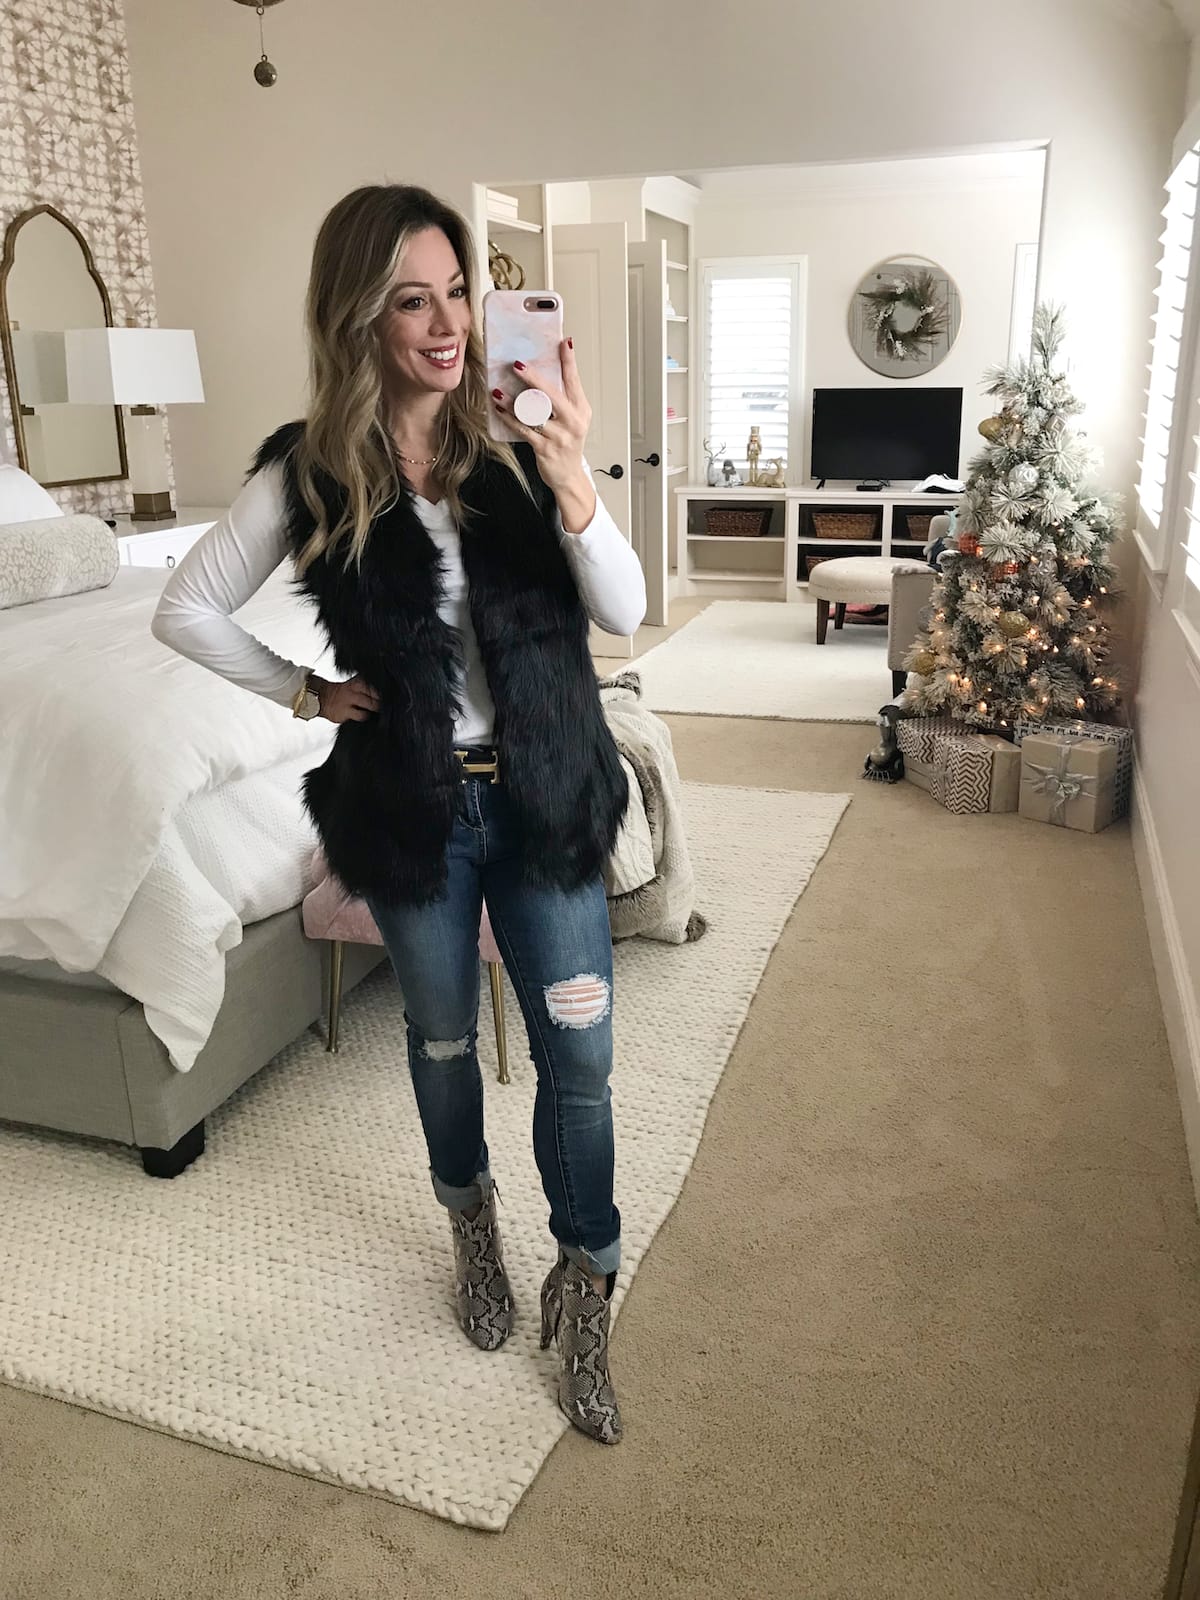 Amazon Fashion Haul - jeans and faux fur vest with v neck tee shirt